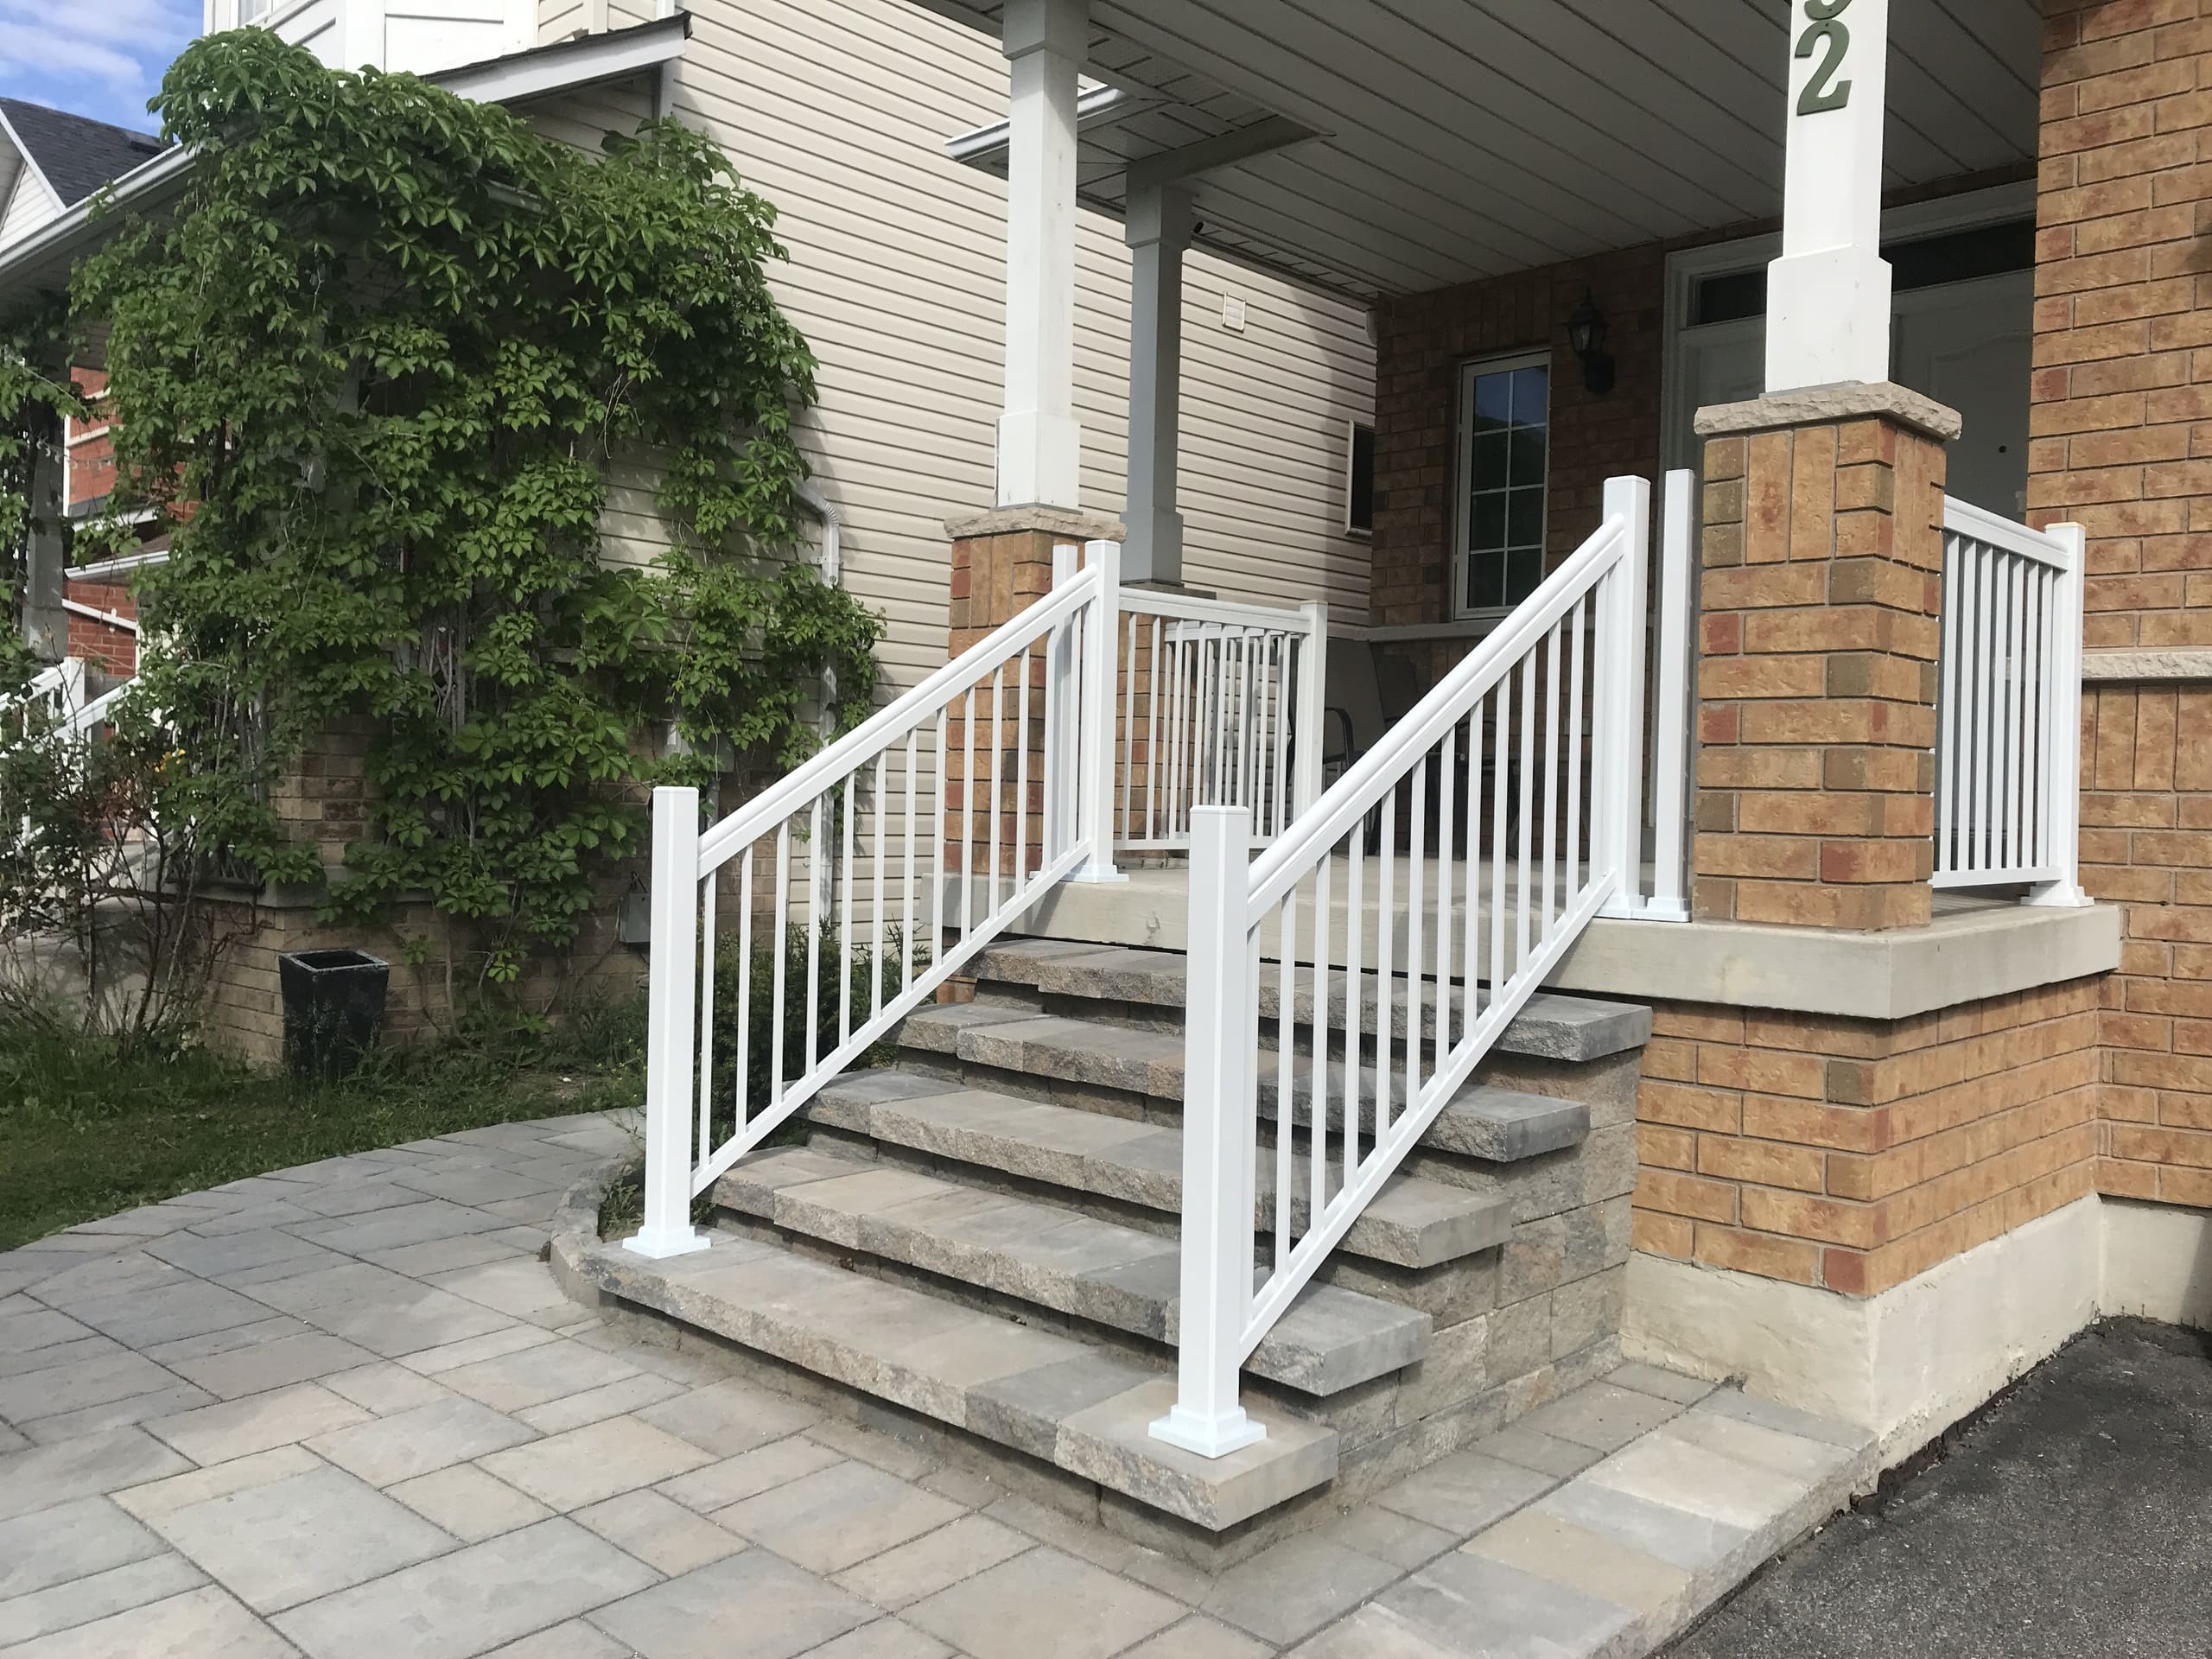 WHITE Aluminum Porch Stair Railings Installation (Georgetown, ON)